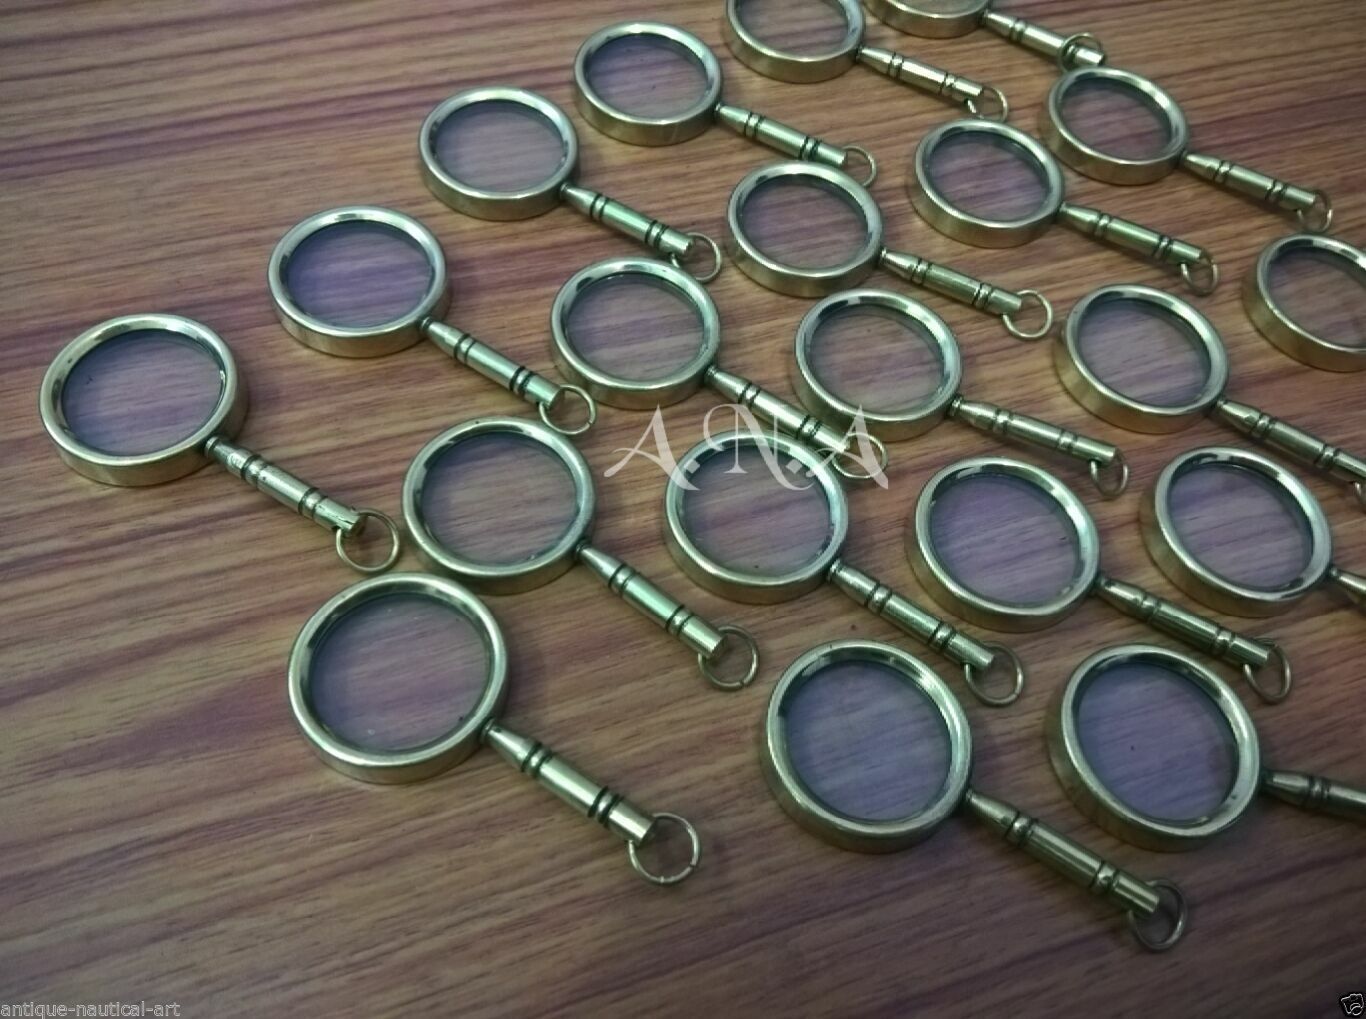 Lot Of 20 Pcs Brass Vintage Magnifier Key chain Collectible Magnifying Key Ring  Без бренда